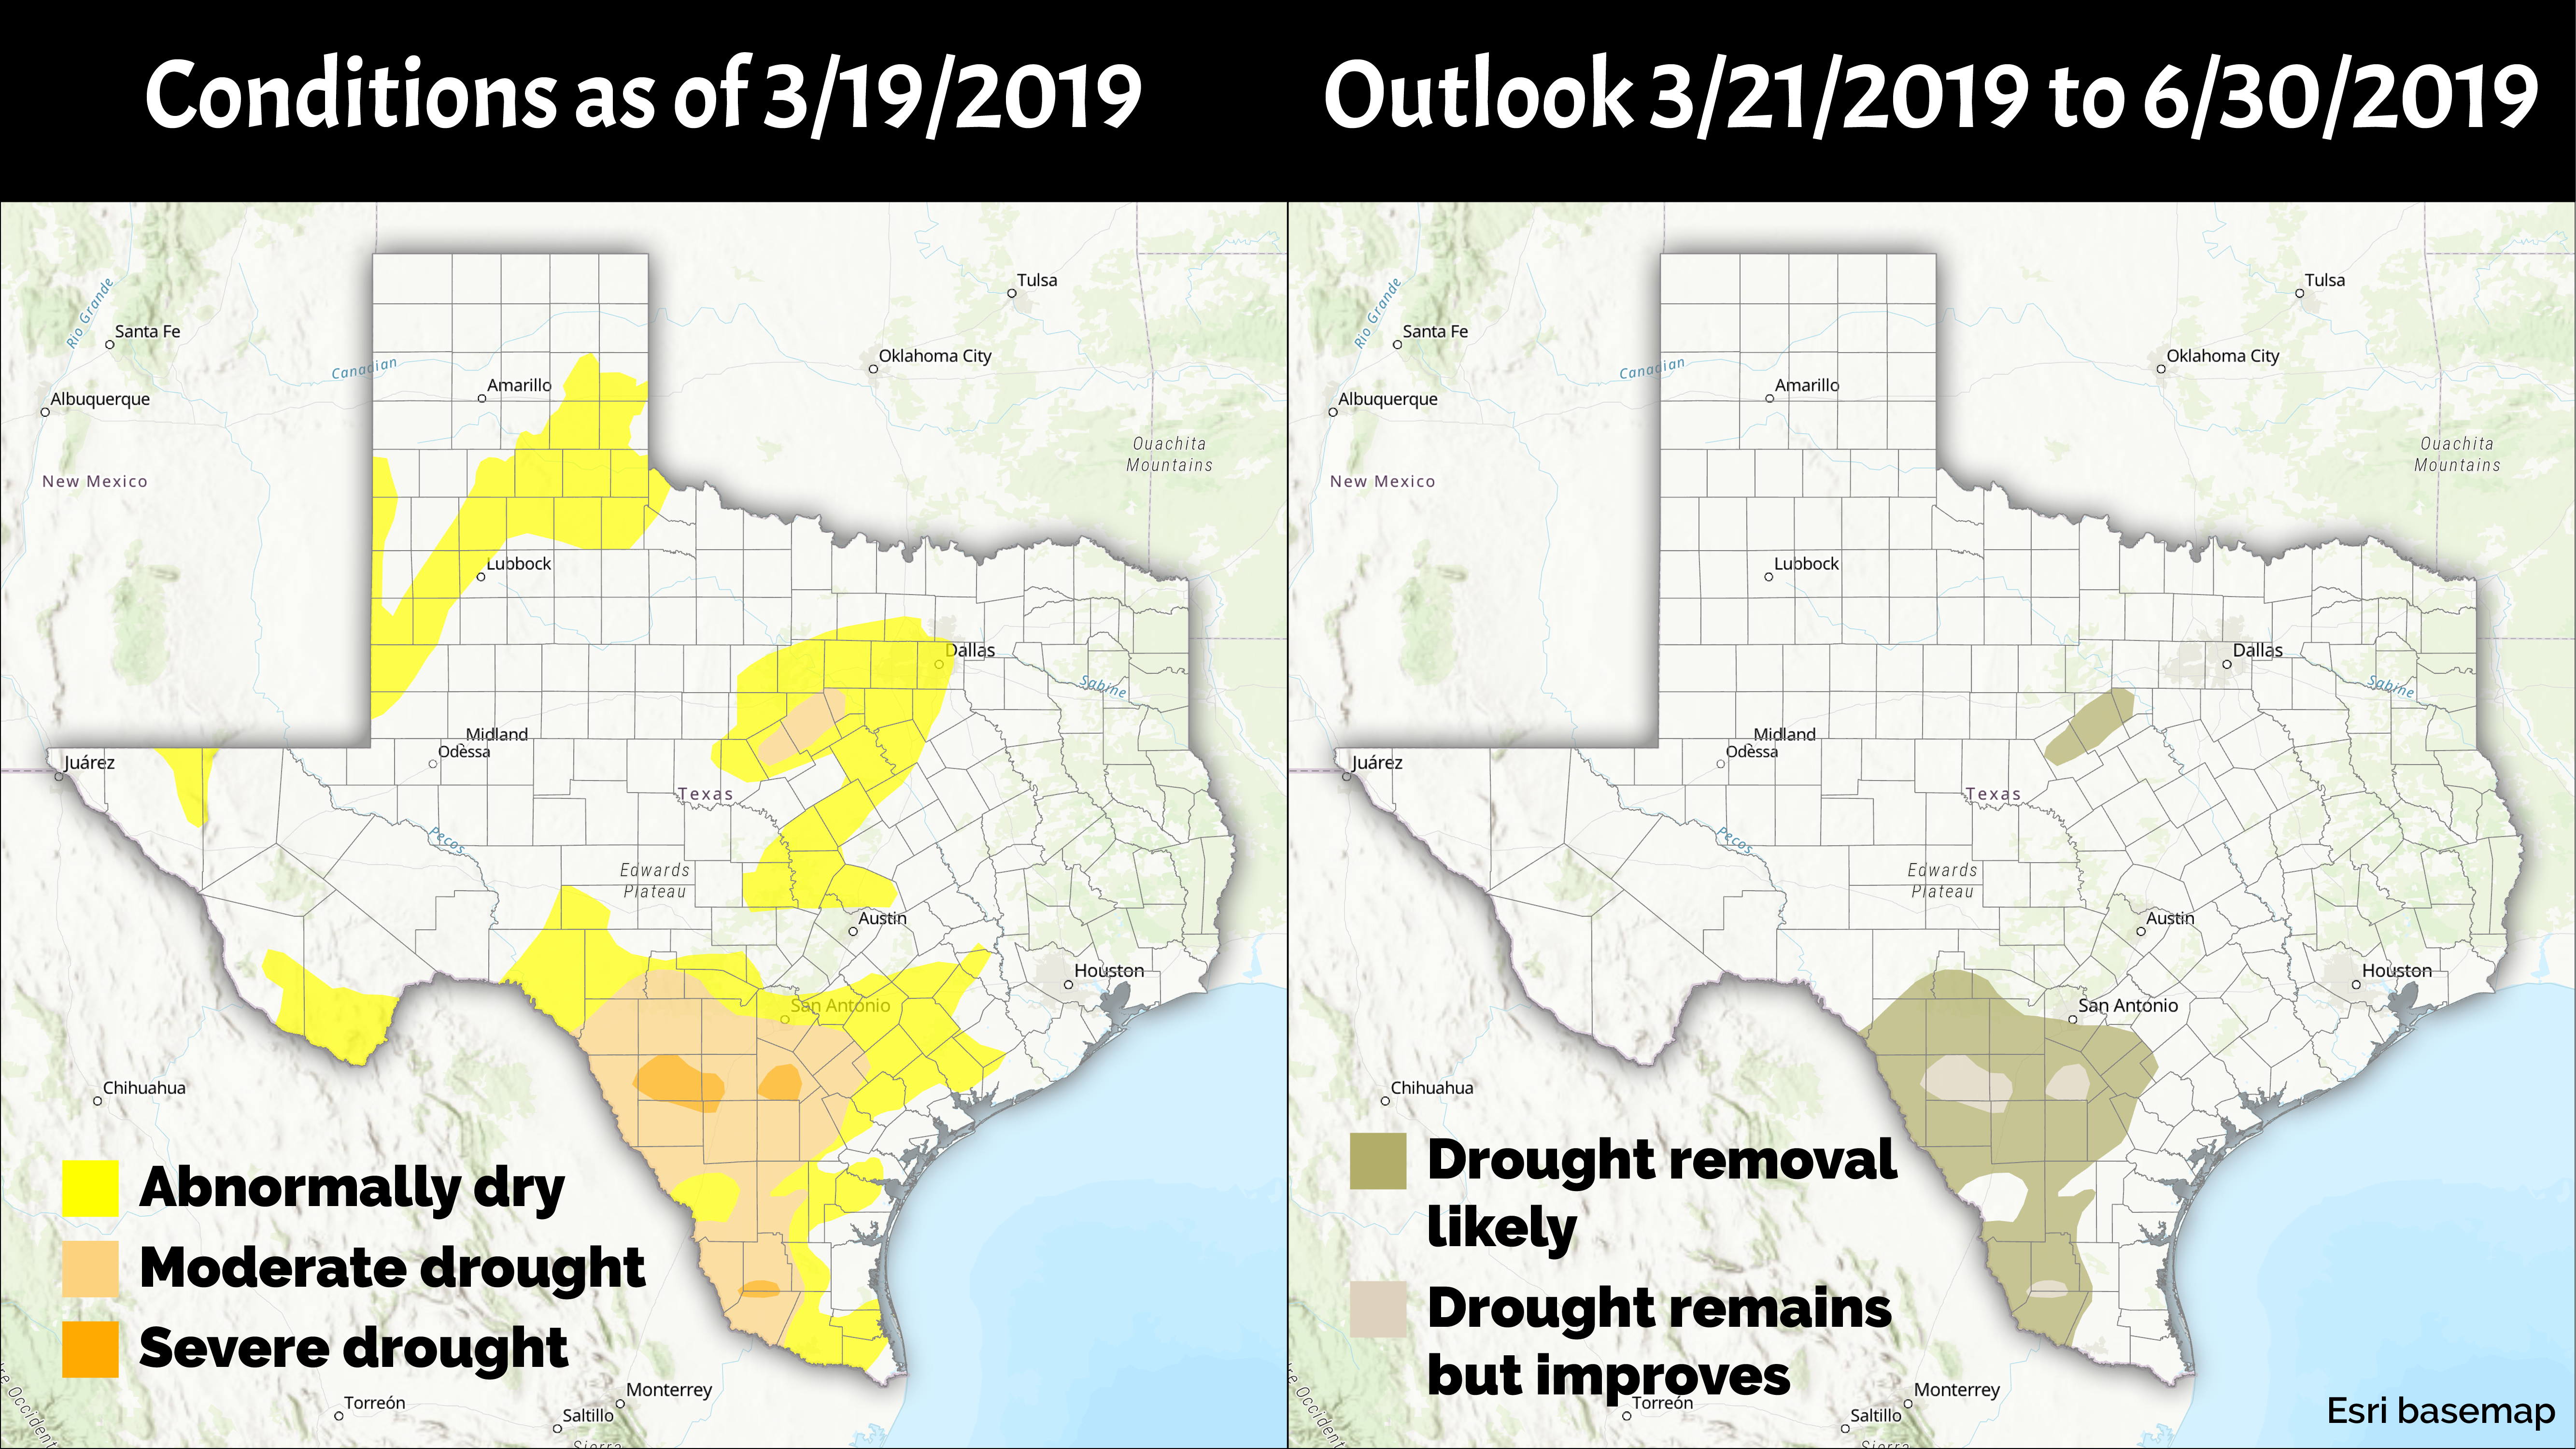 Drought Conditions and Outlook, March 2019